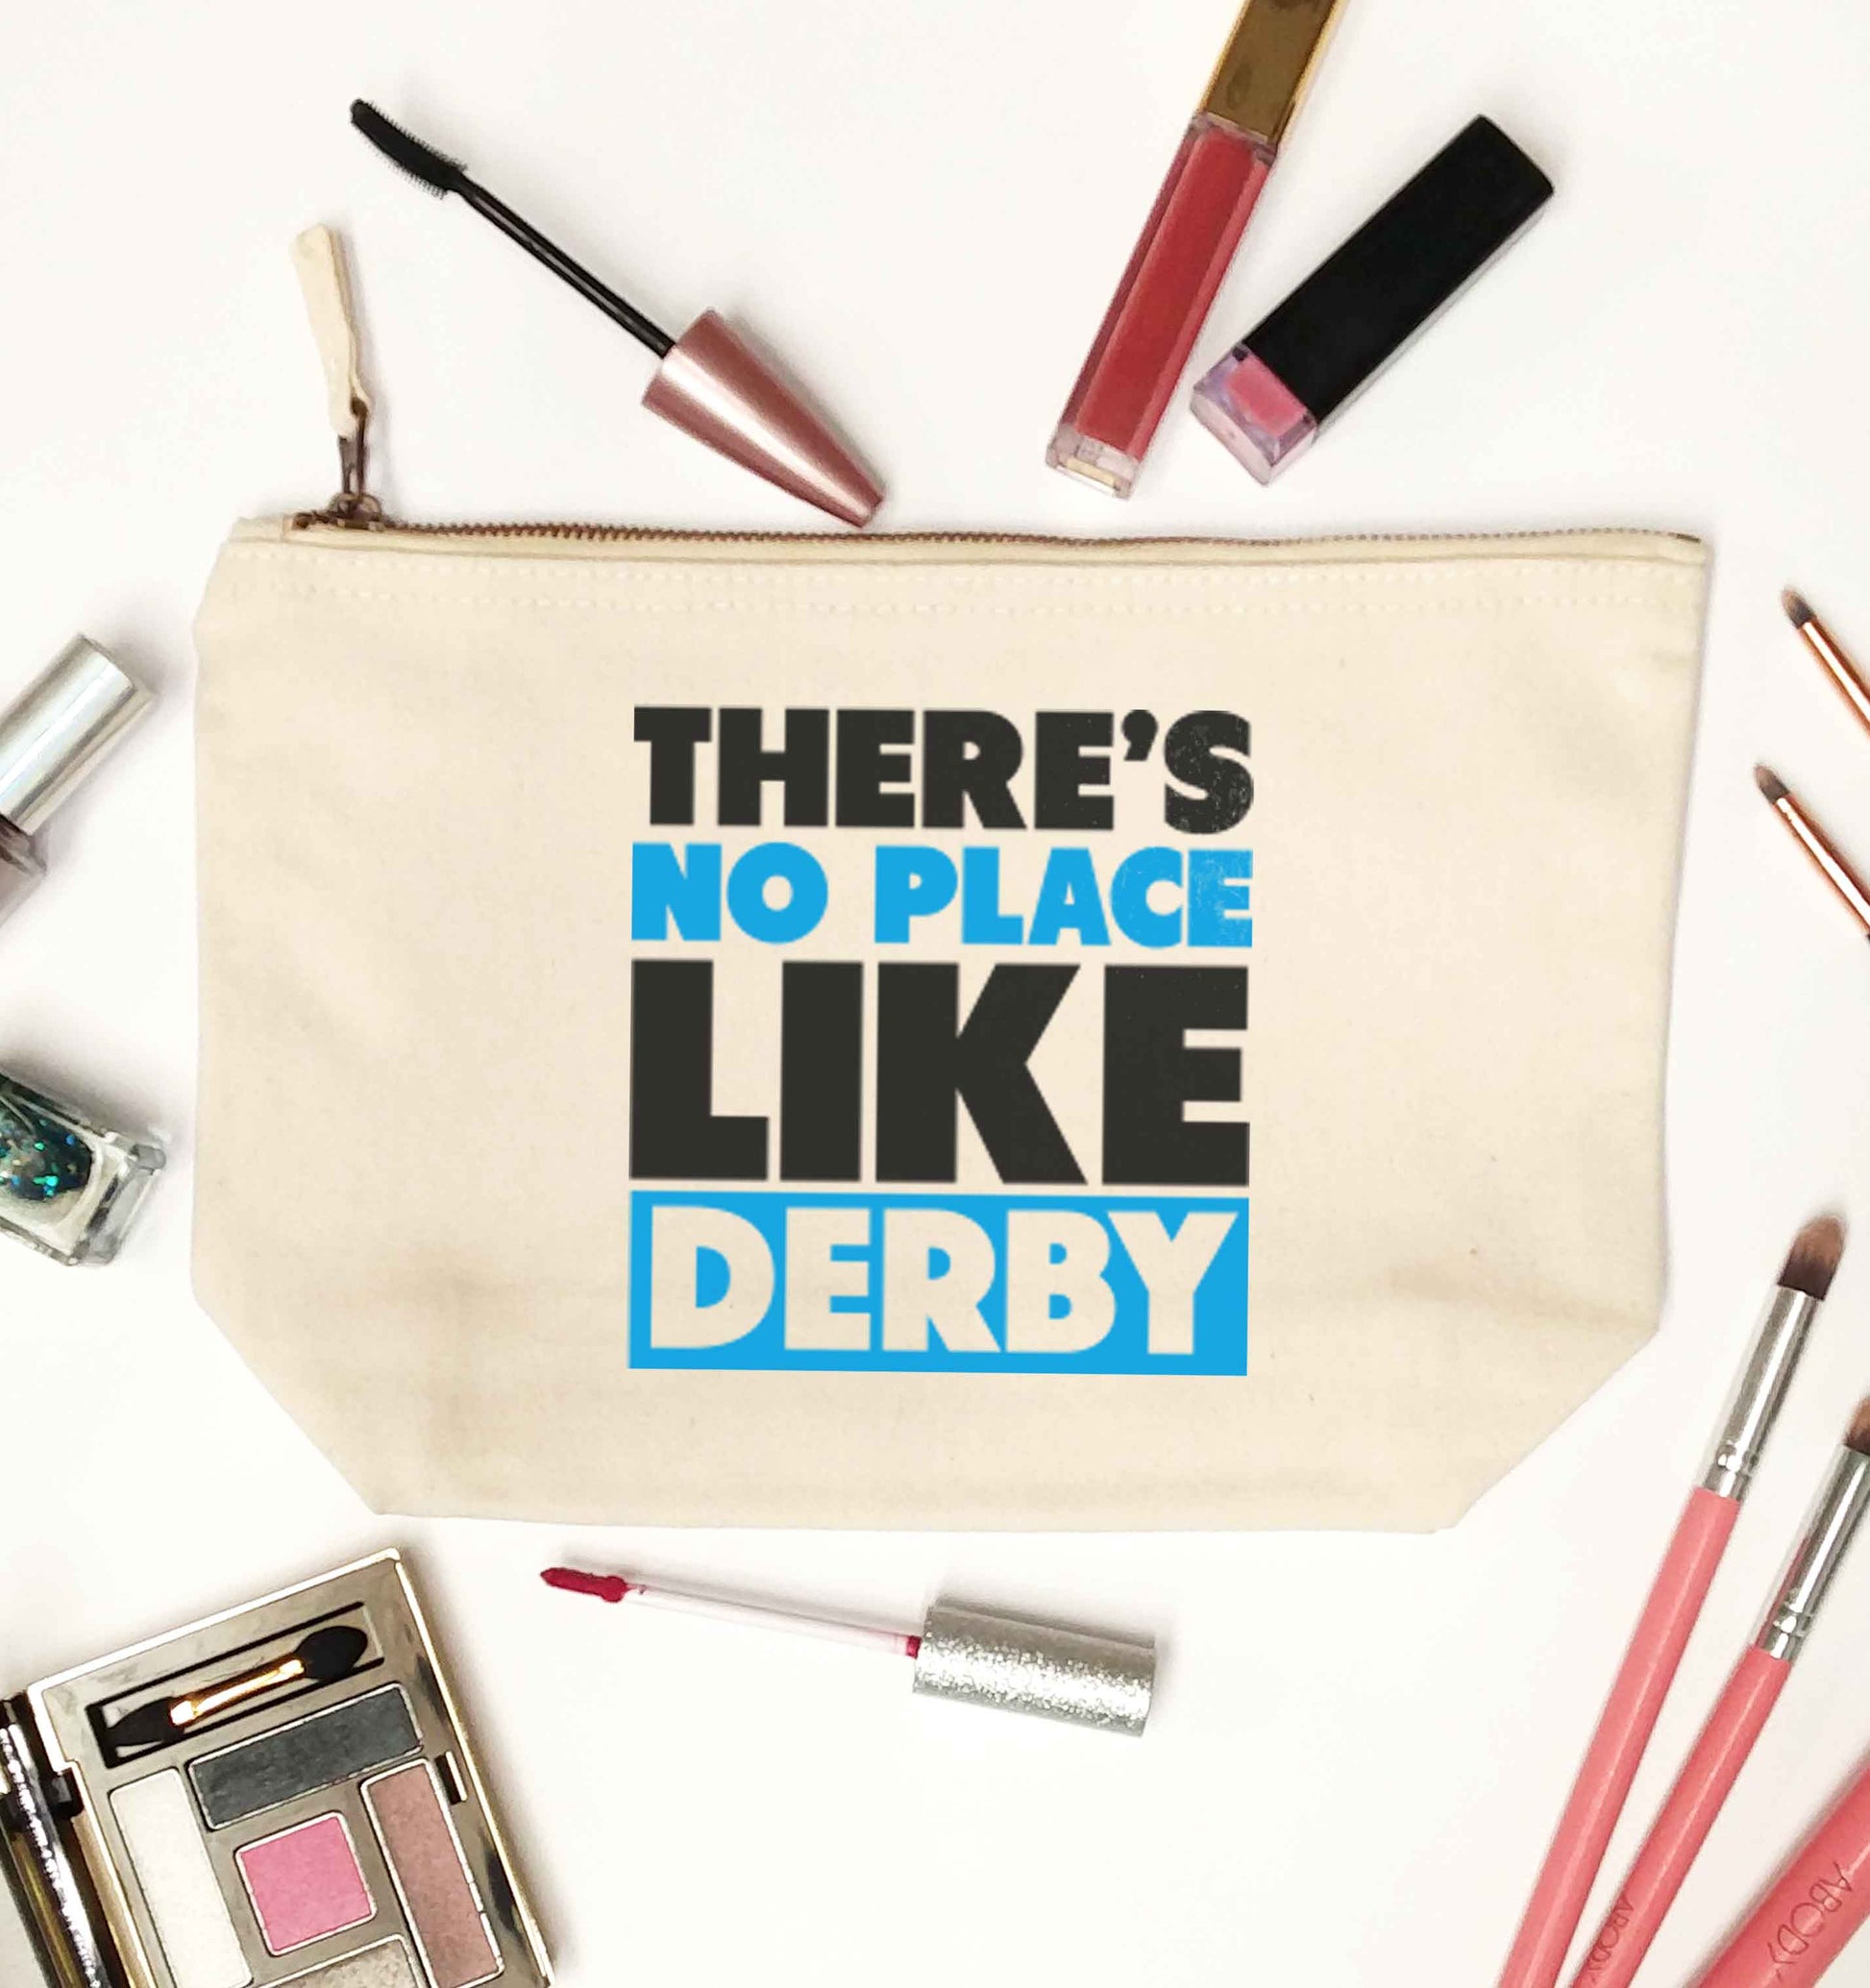 There's no place like Derby natural makeup bag